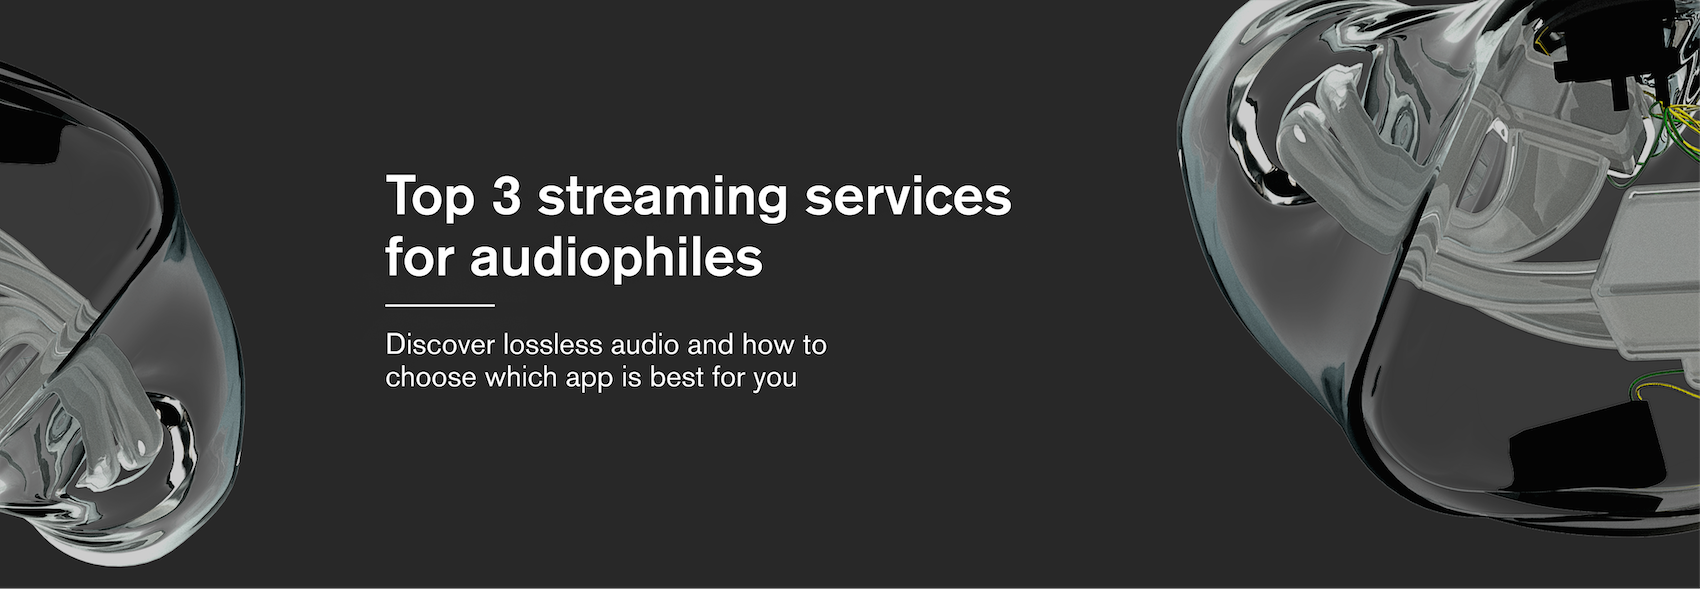 Top 3 streaming services for audiophiles